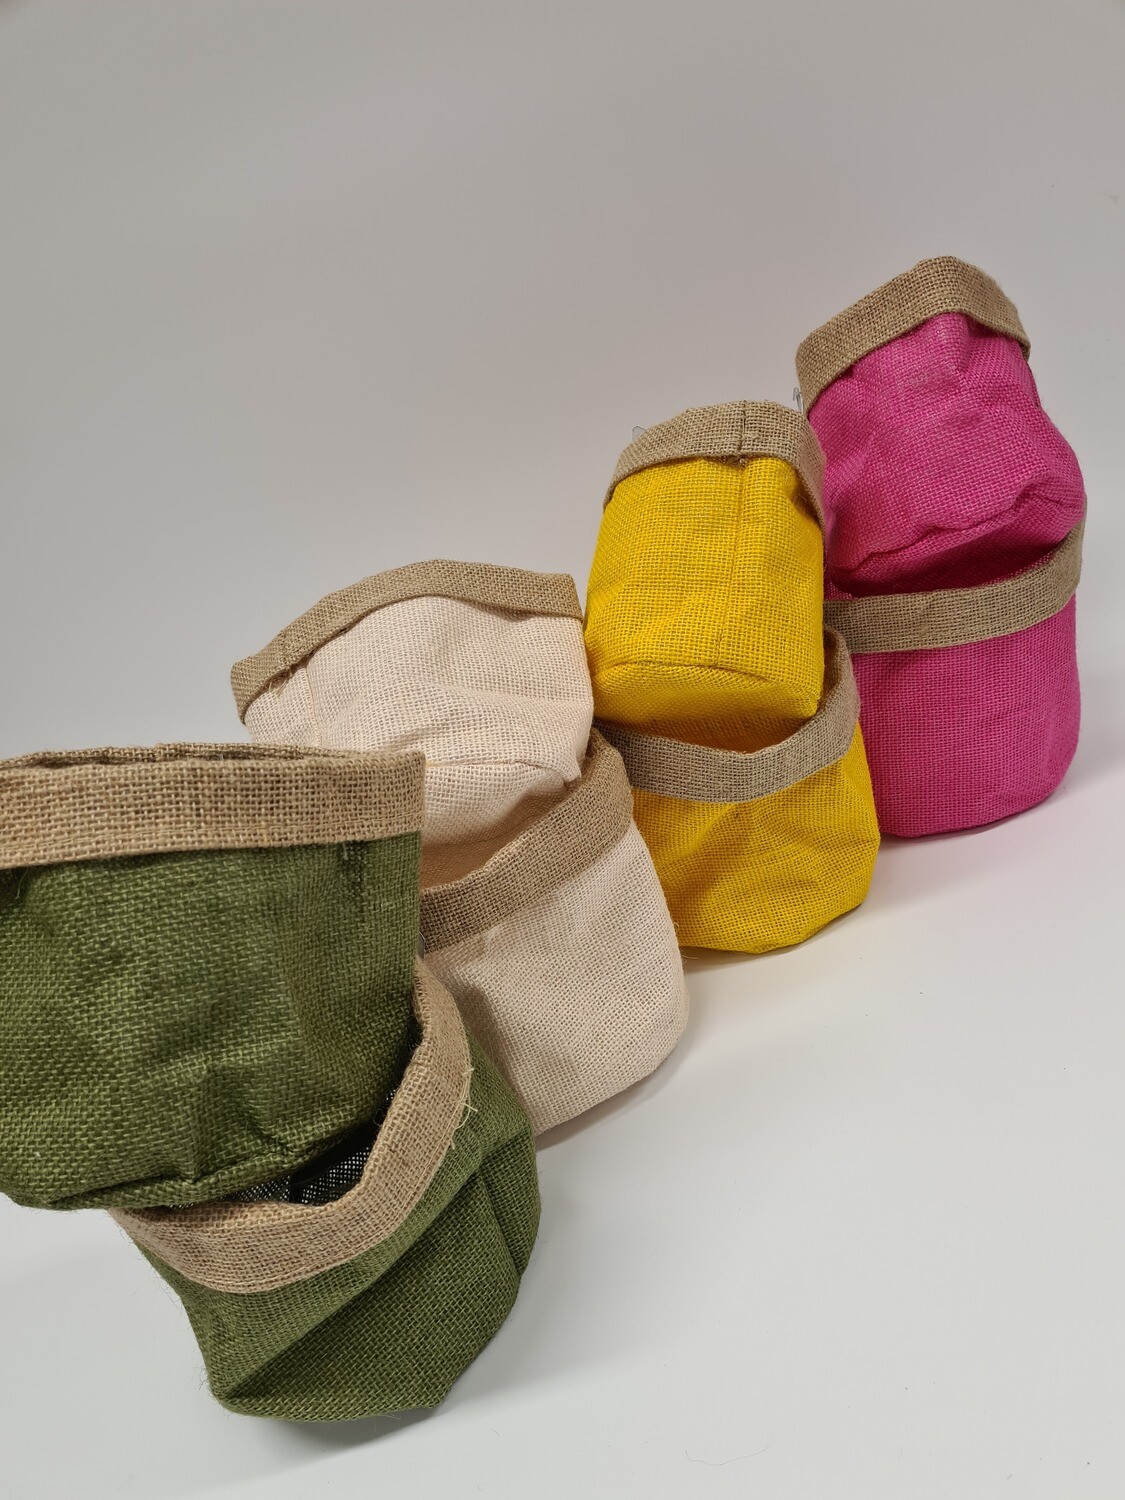 Hessian Bags with Liner Small